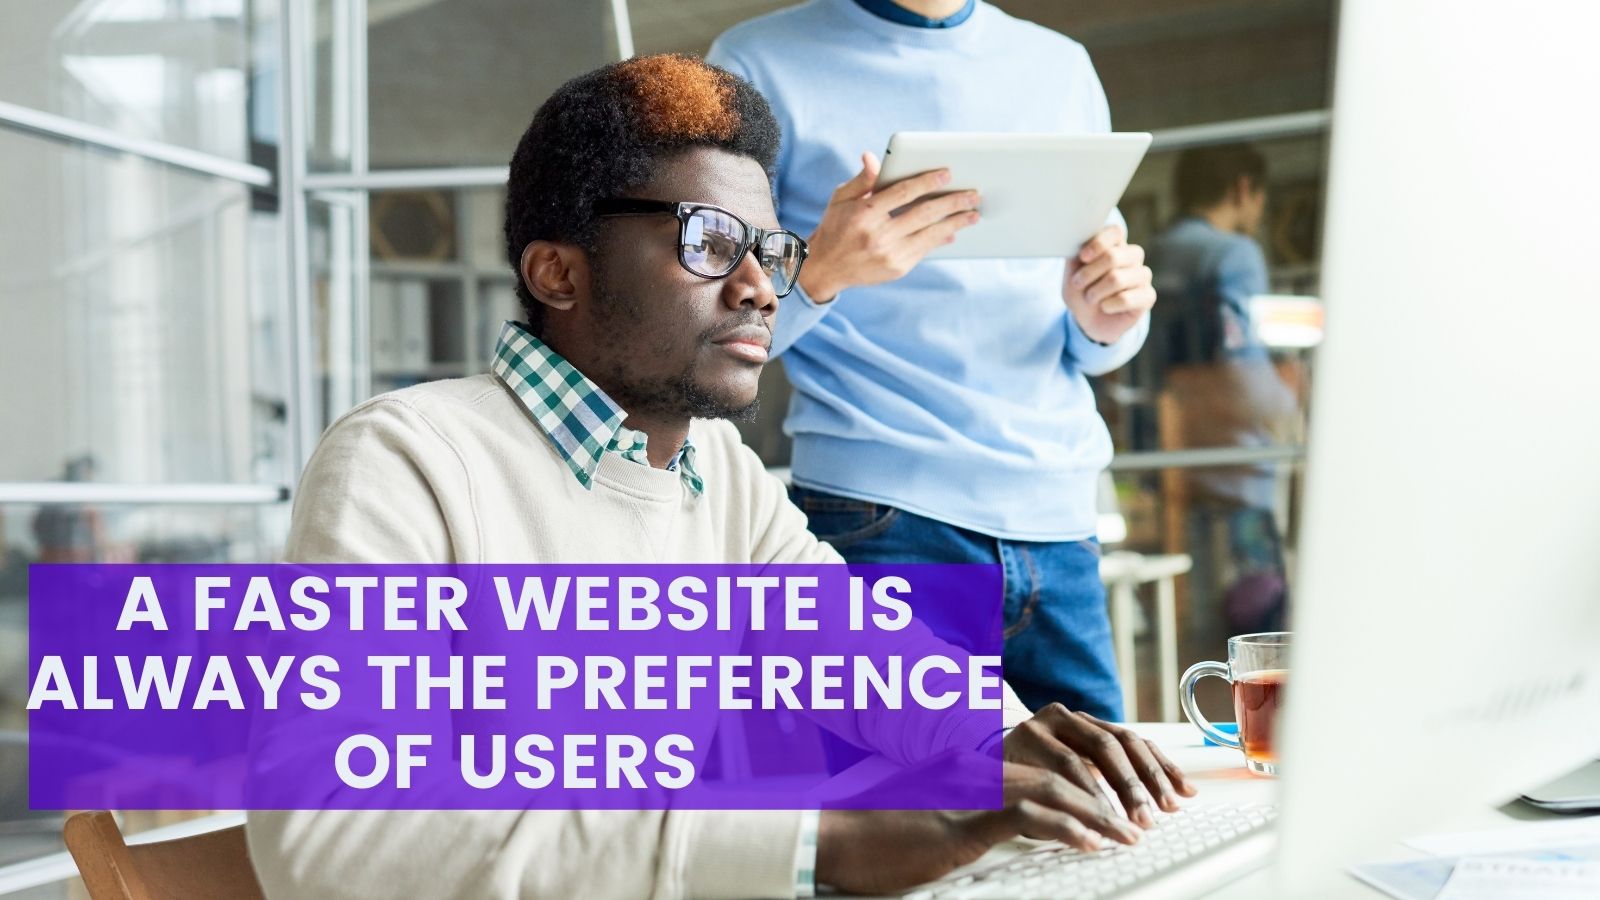 A faster website is the preference of users on agilitycms.com